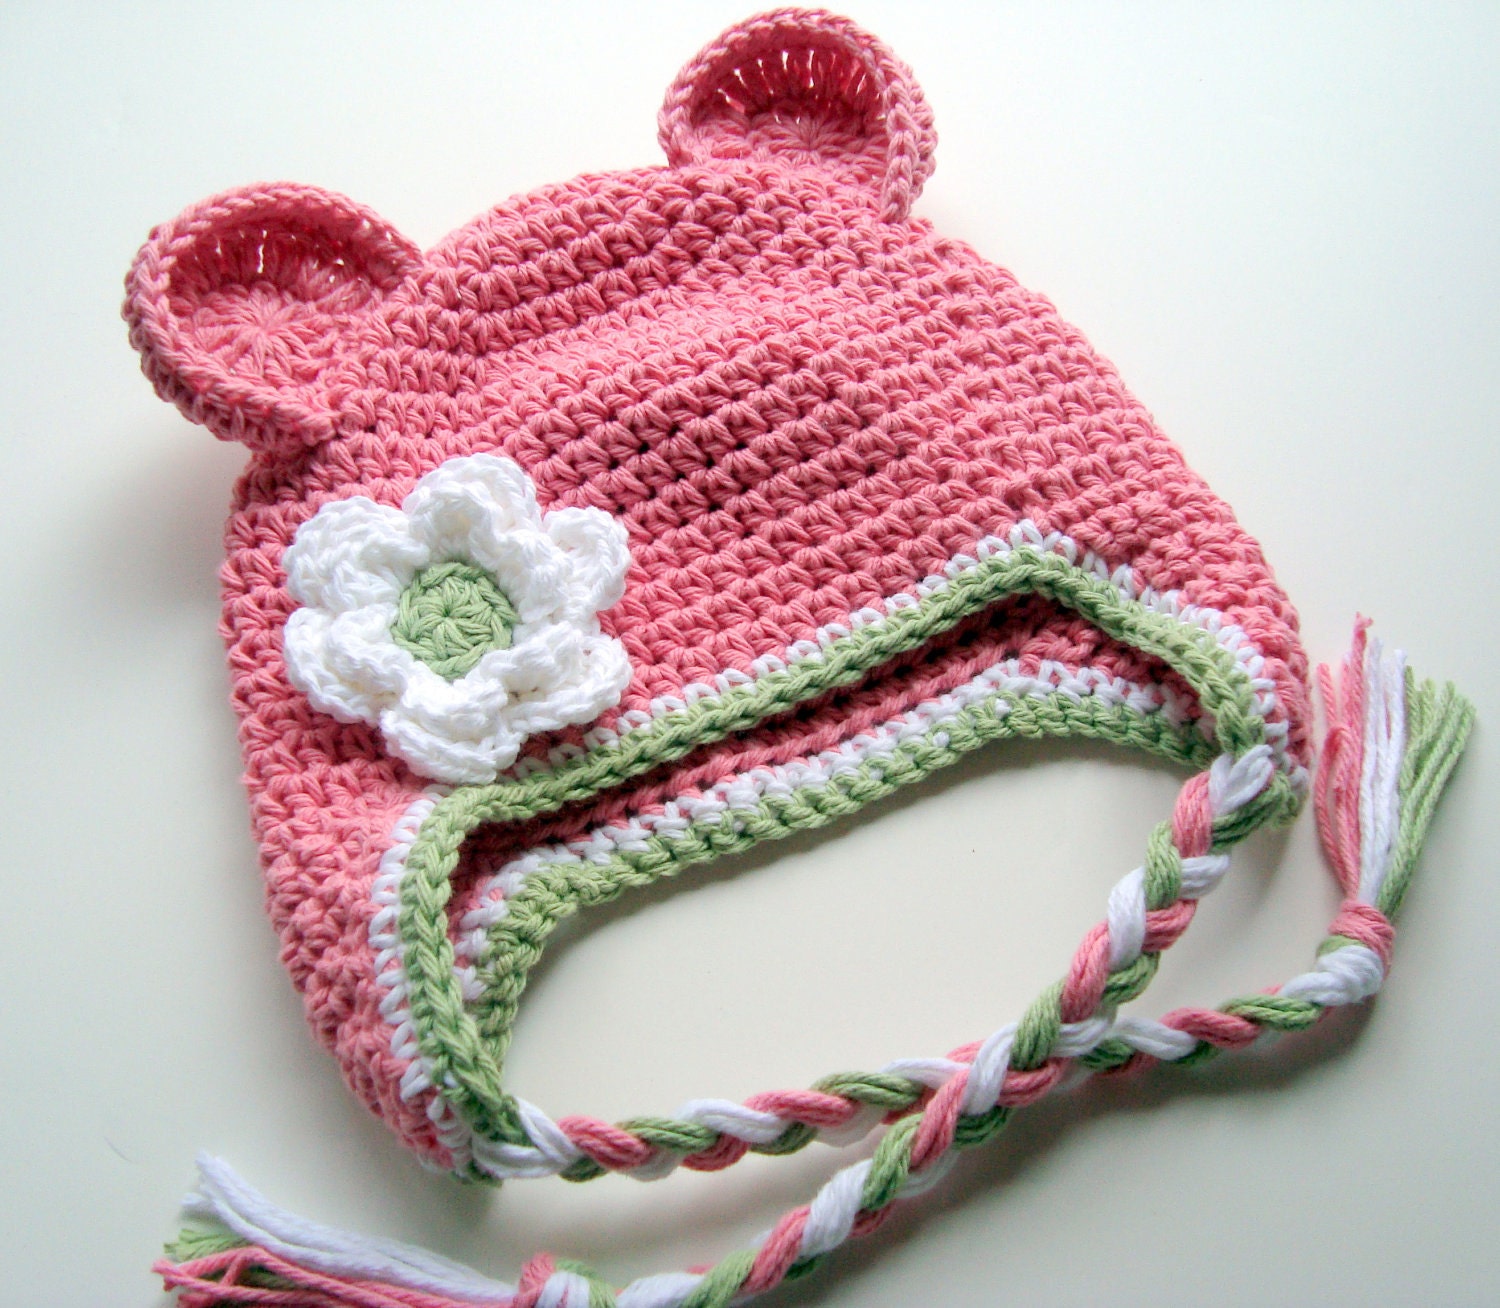 Girls Cotton Crochet Ear Flap Beanie Hat with Ears and Ties-Custom Made in Your Color Choices-MADE TO ORDER